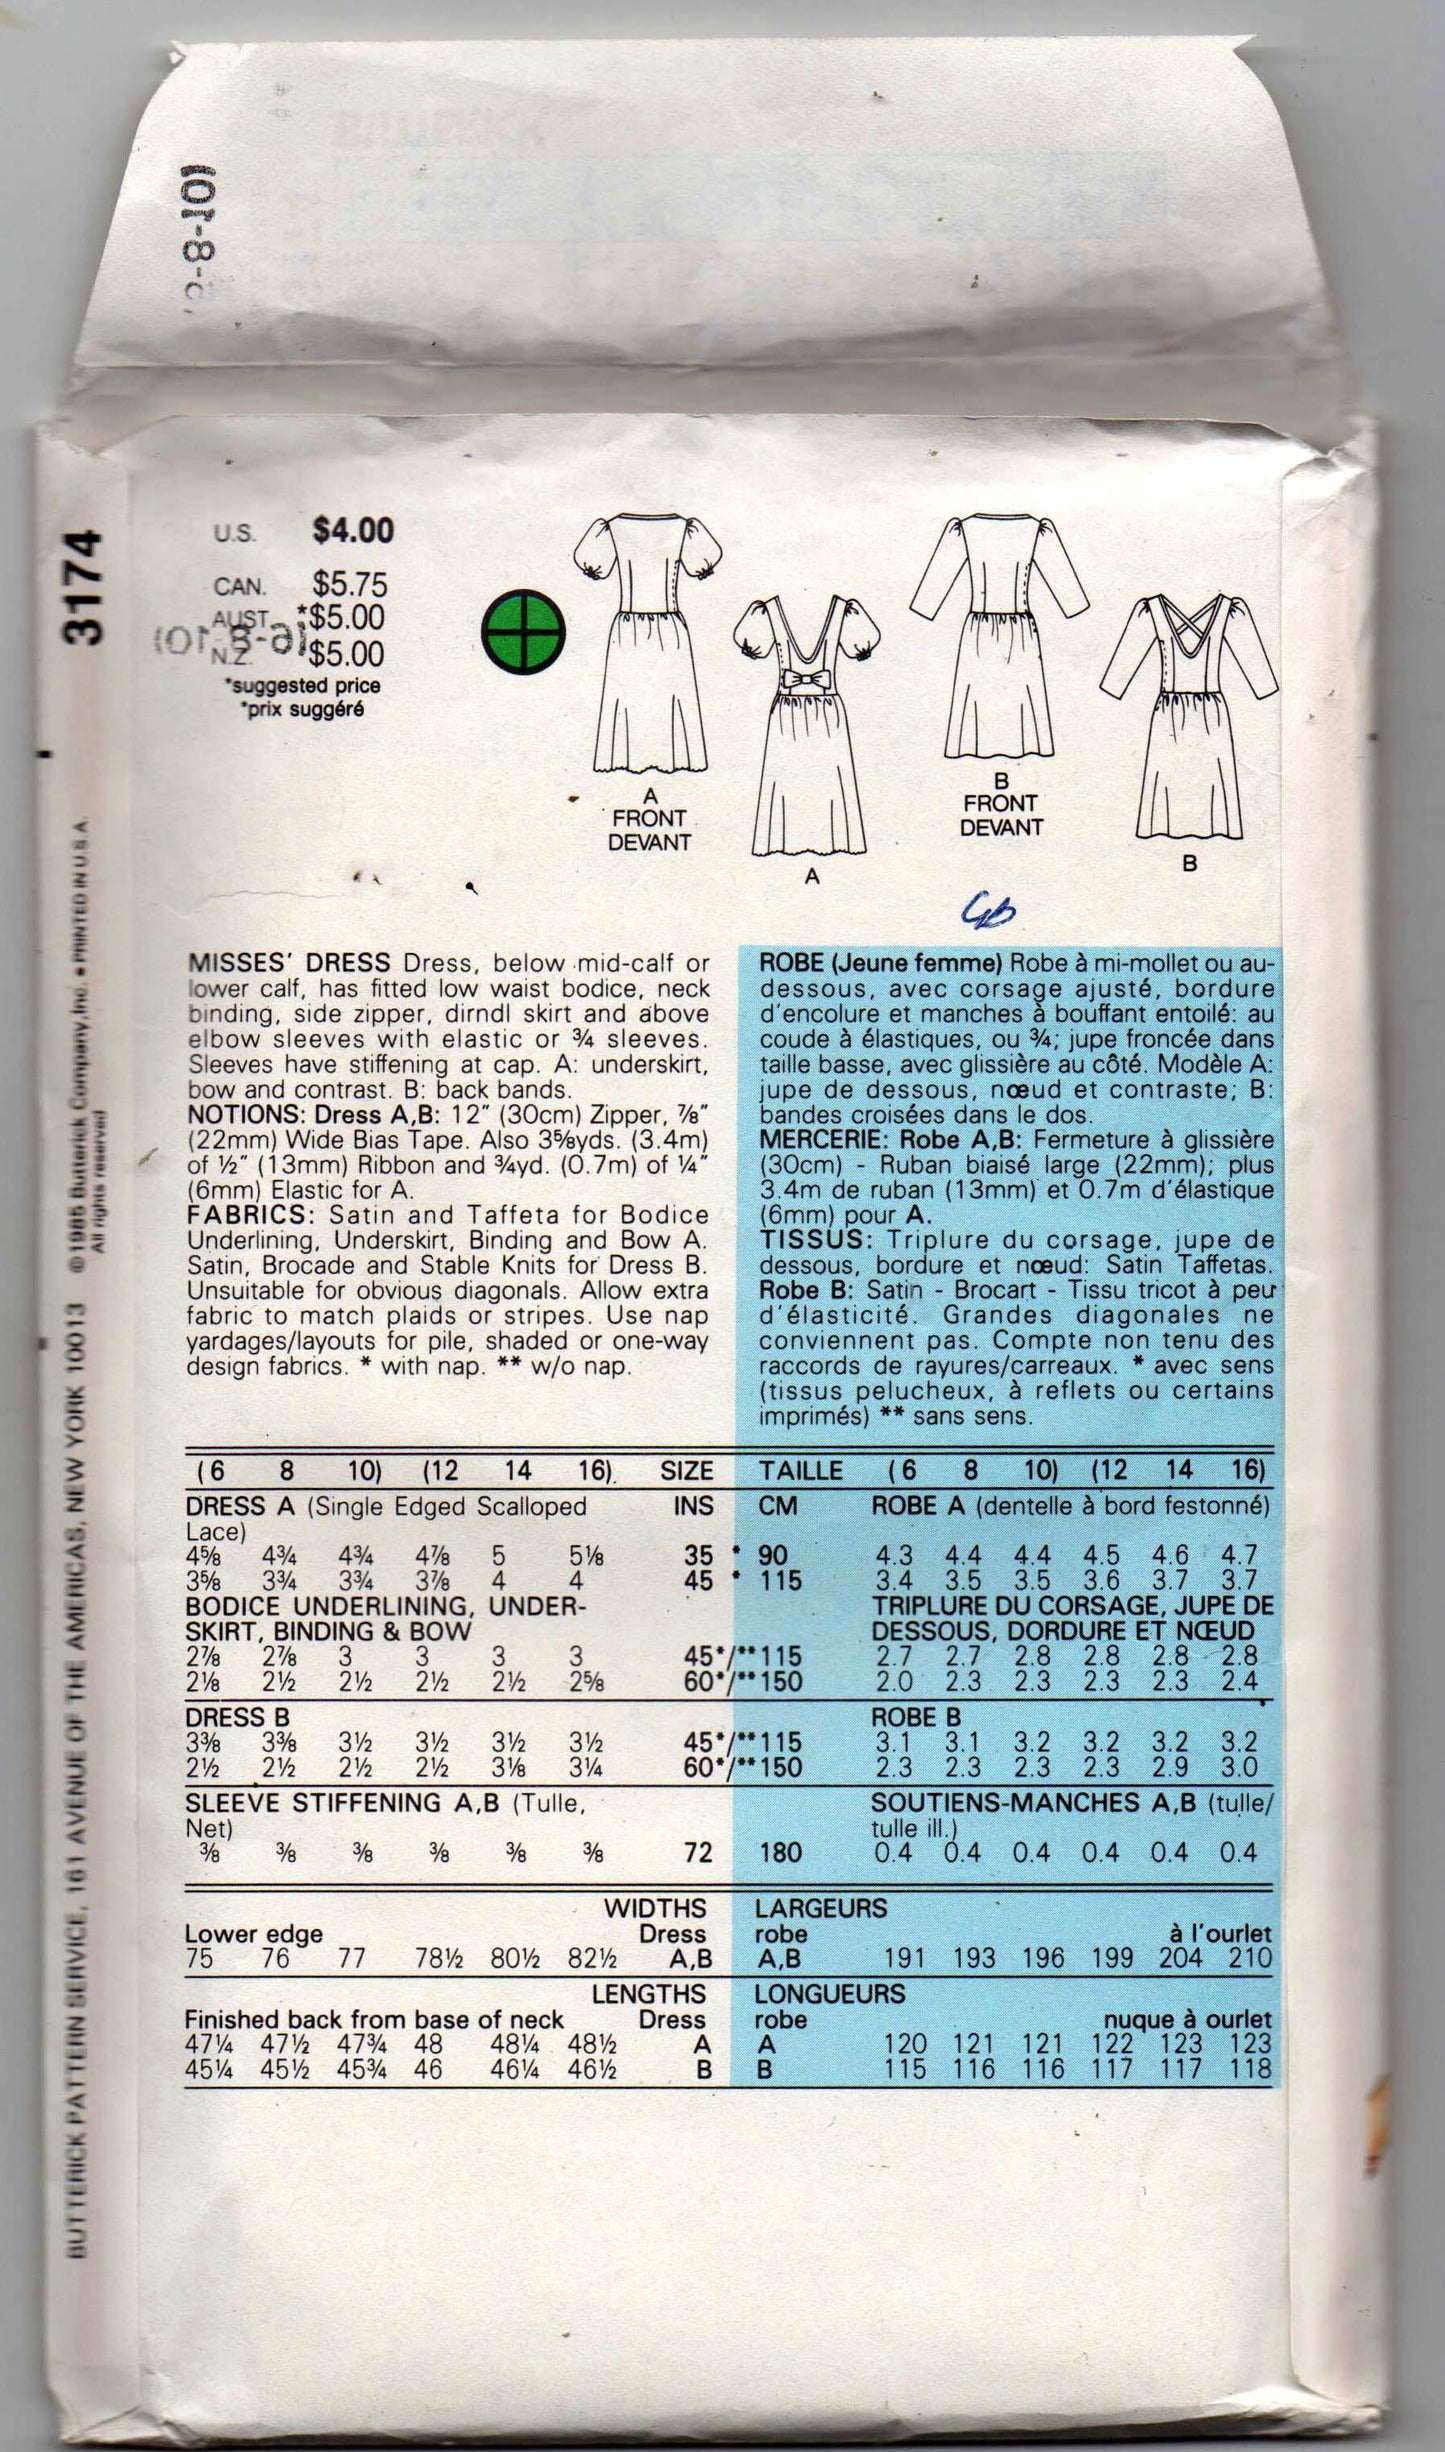 Butterick 3174 Womens Drop Waisted V Back Evening Bridesmaids Prom Dress with Puff or Long Sleeves 1980s Vintage Sewing Pattern Size 6 - 10 UNCUT Factory Folded